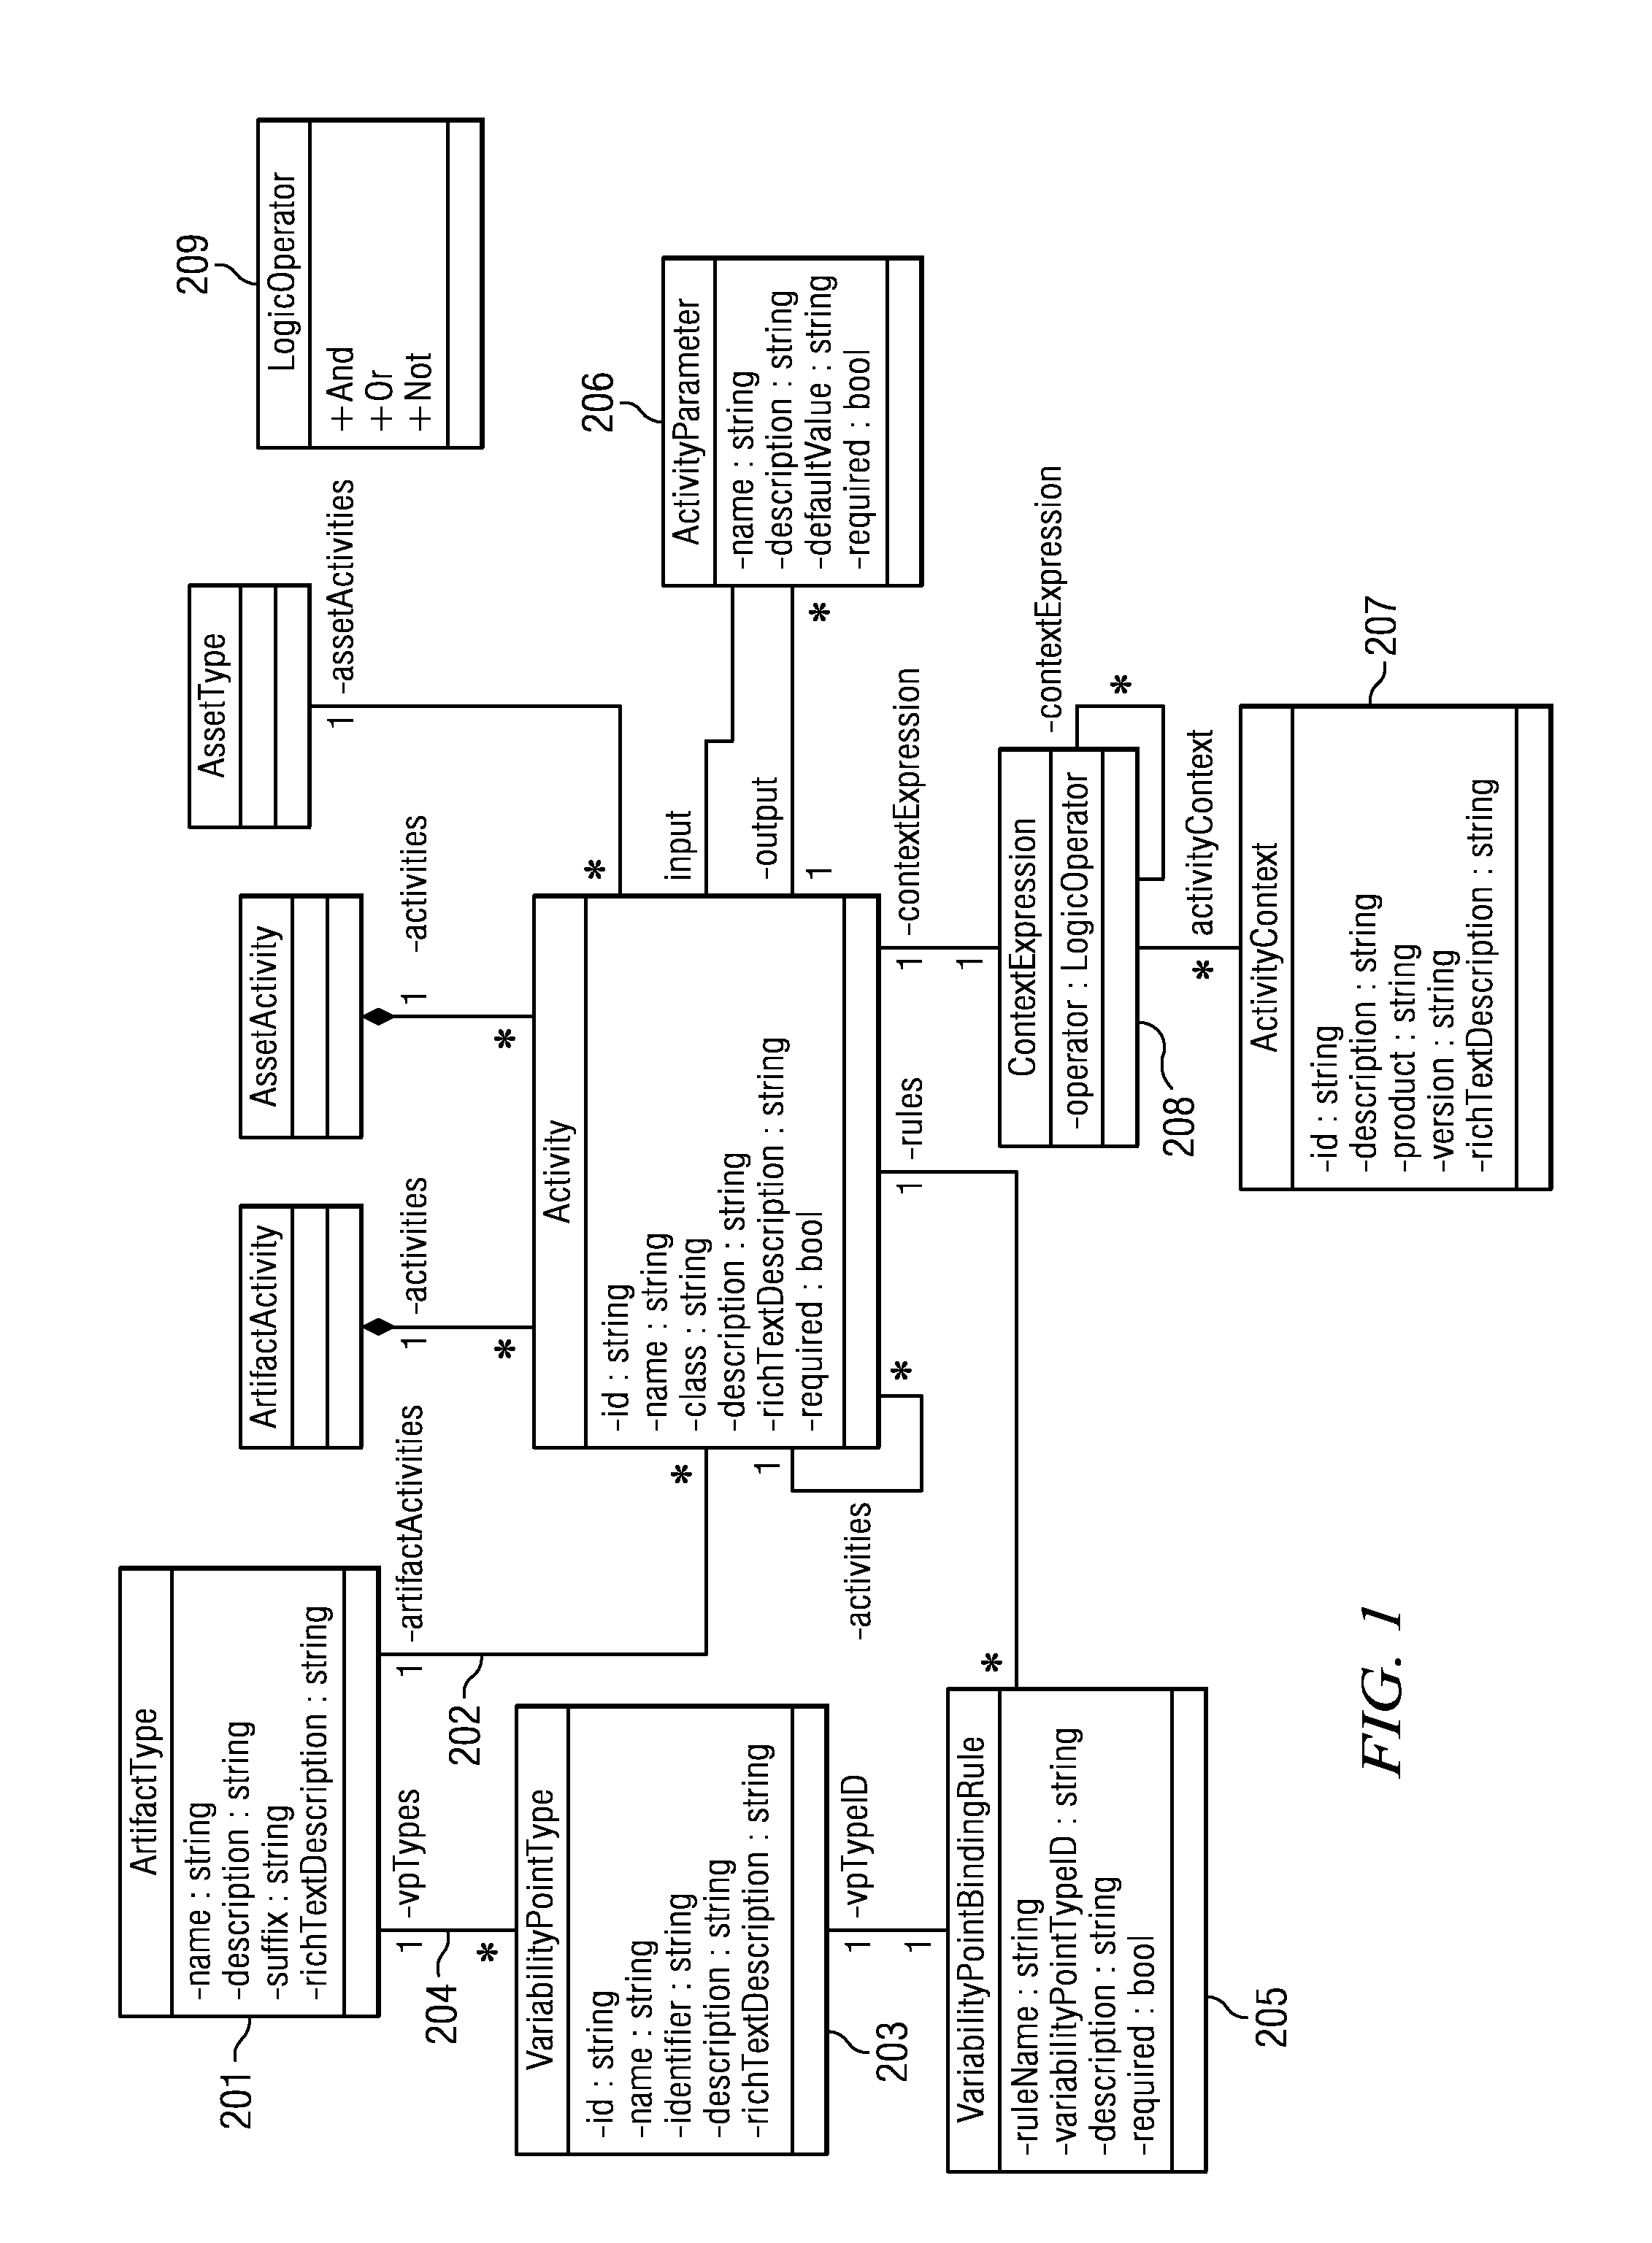 Software Asset Packaging and Consumption Method and System